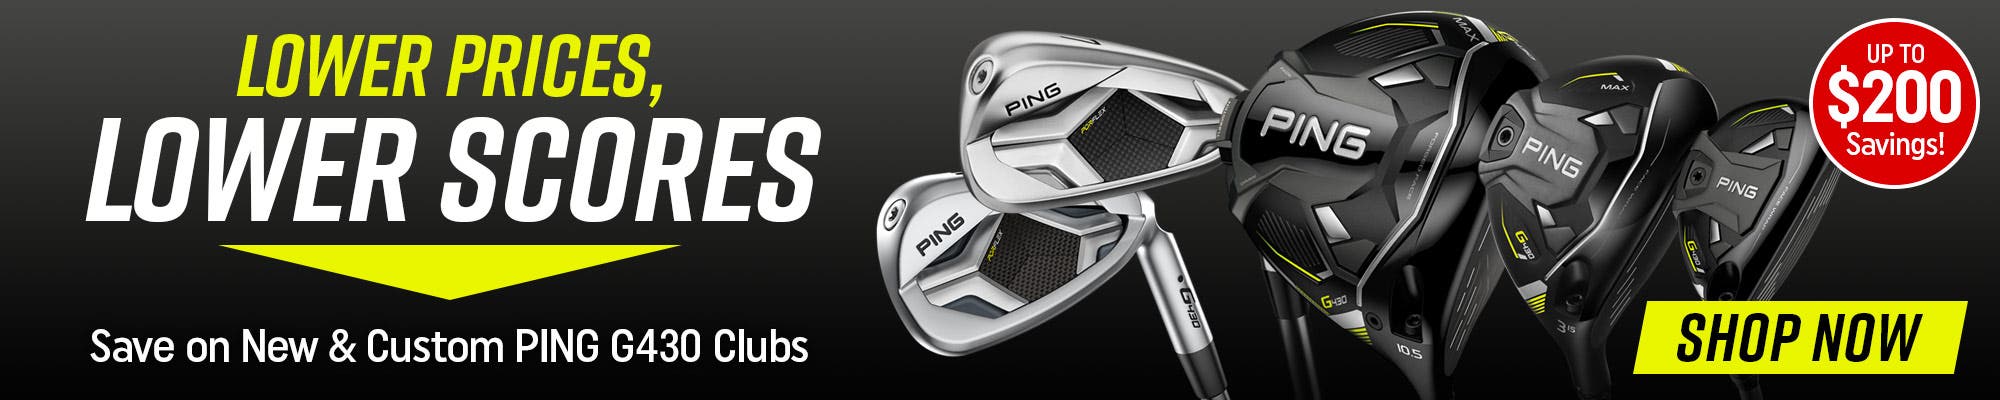 lower prices, lower scores | save on new and custom ping g430 clubs | shop now |up to $200 savings